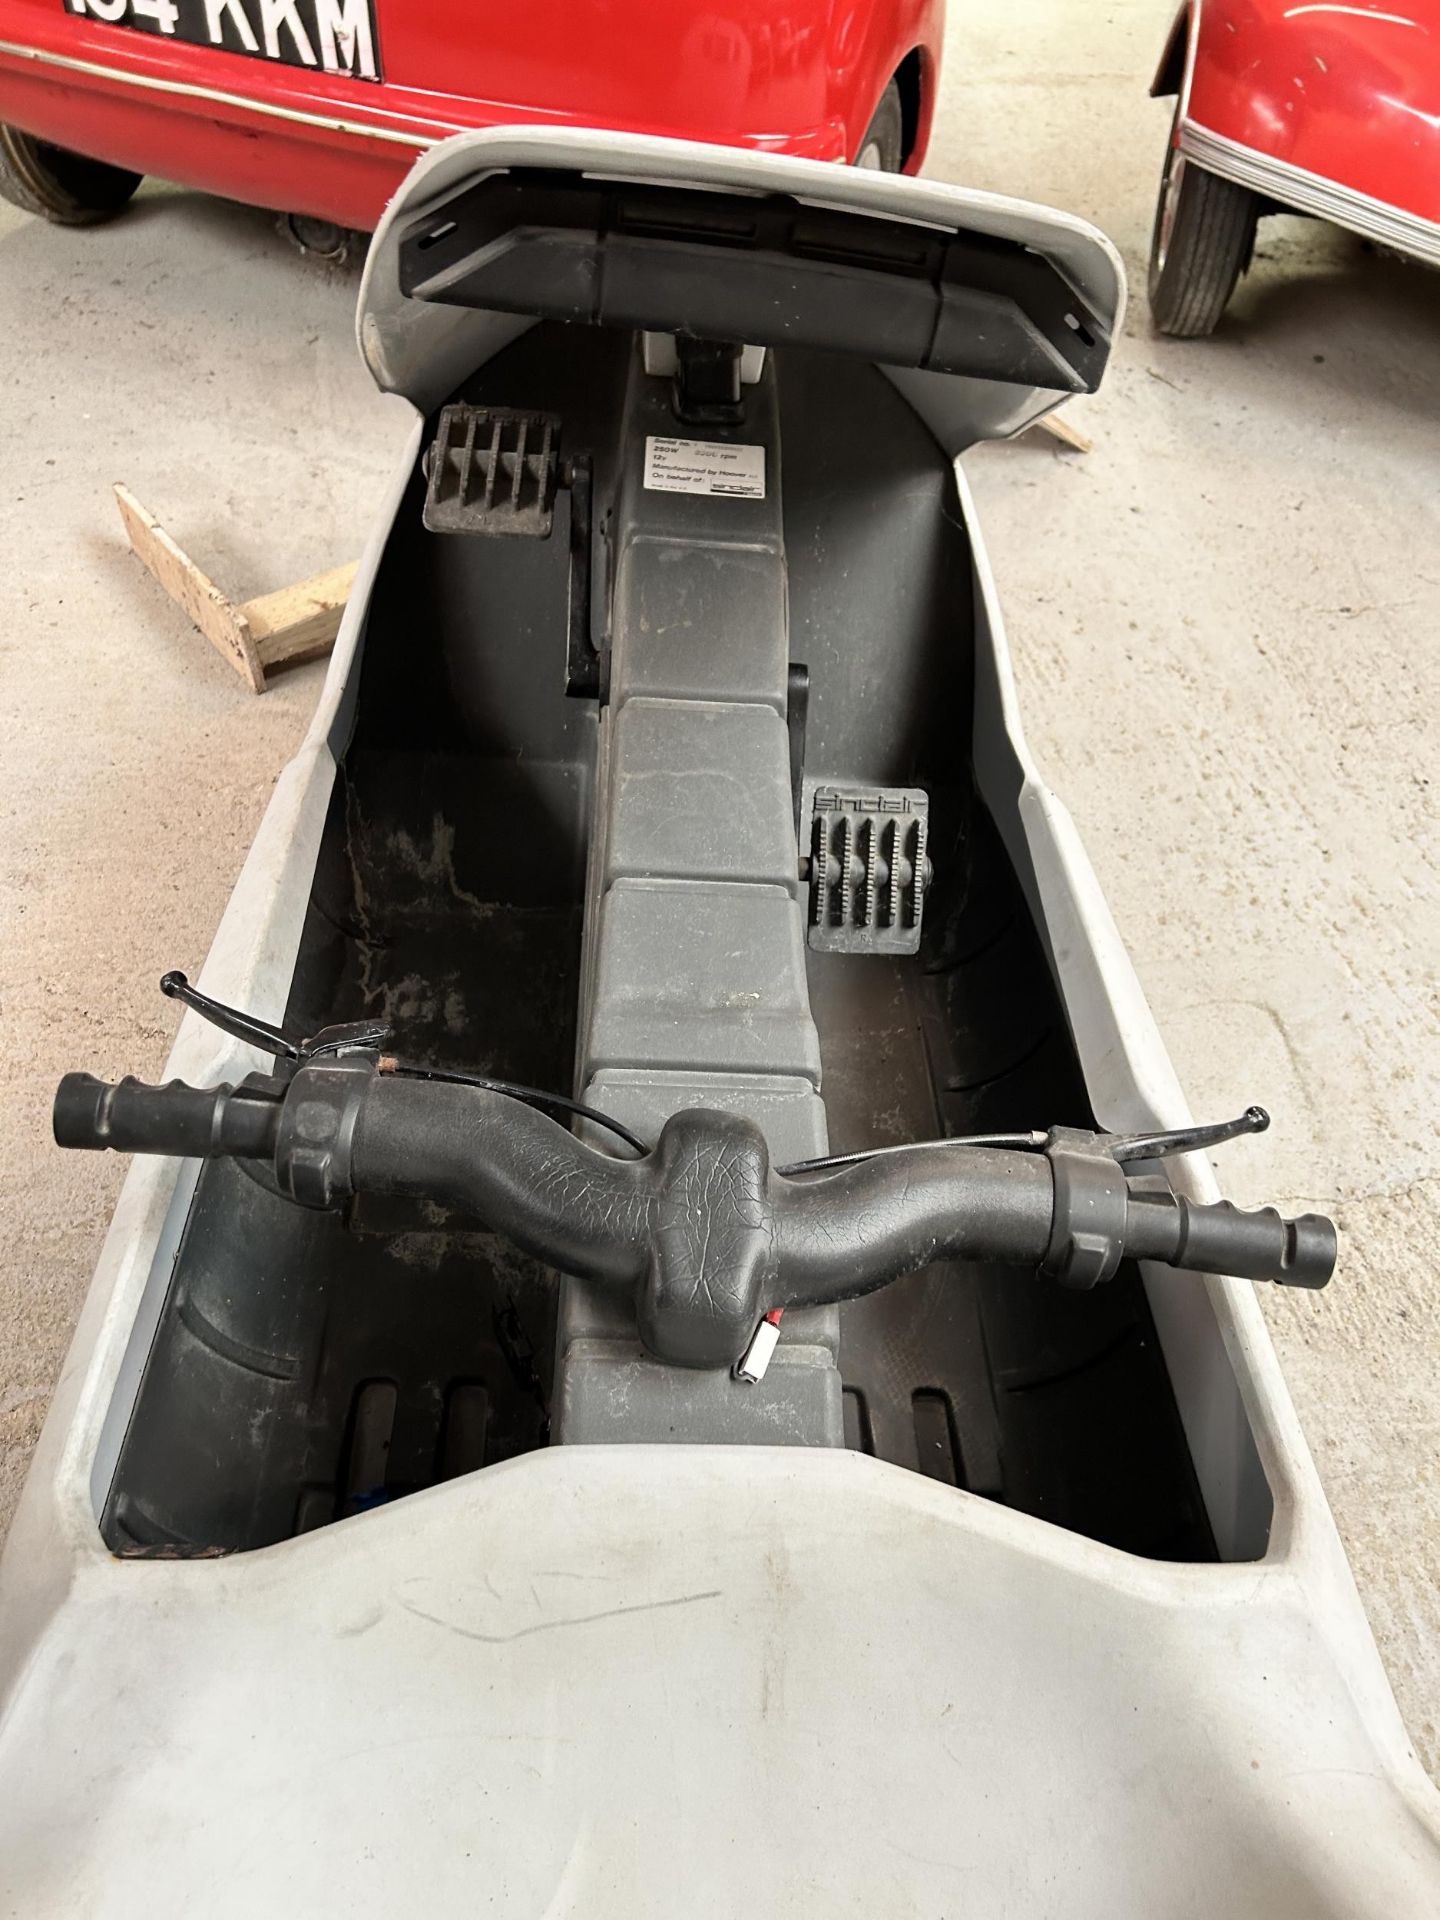 A Sinclair C5 electrically assisted pedal cycle, circa 1985 Being sold without reserve no battery - Image 3 of 9